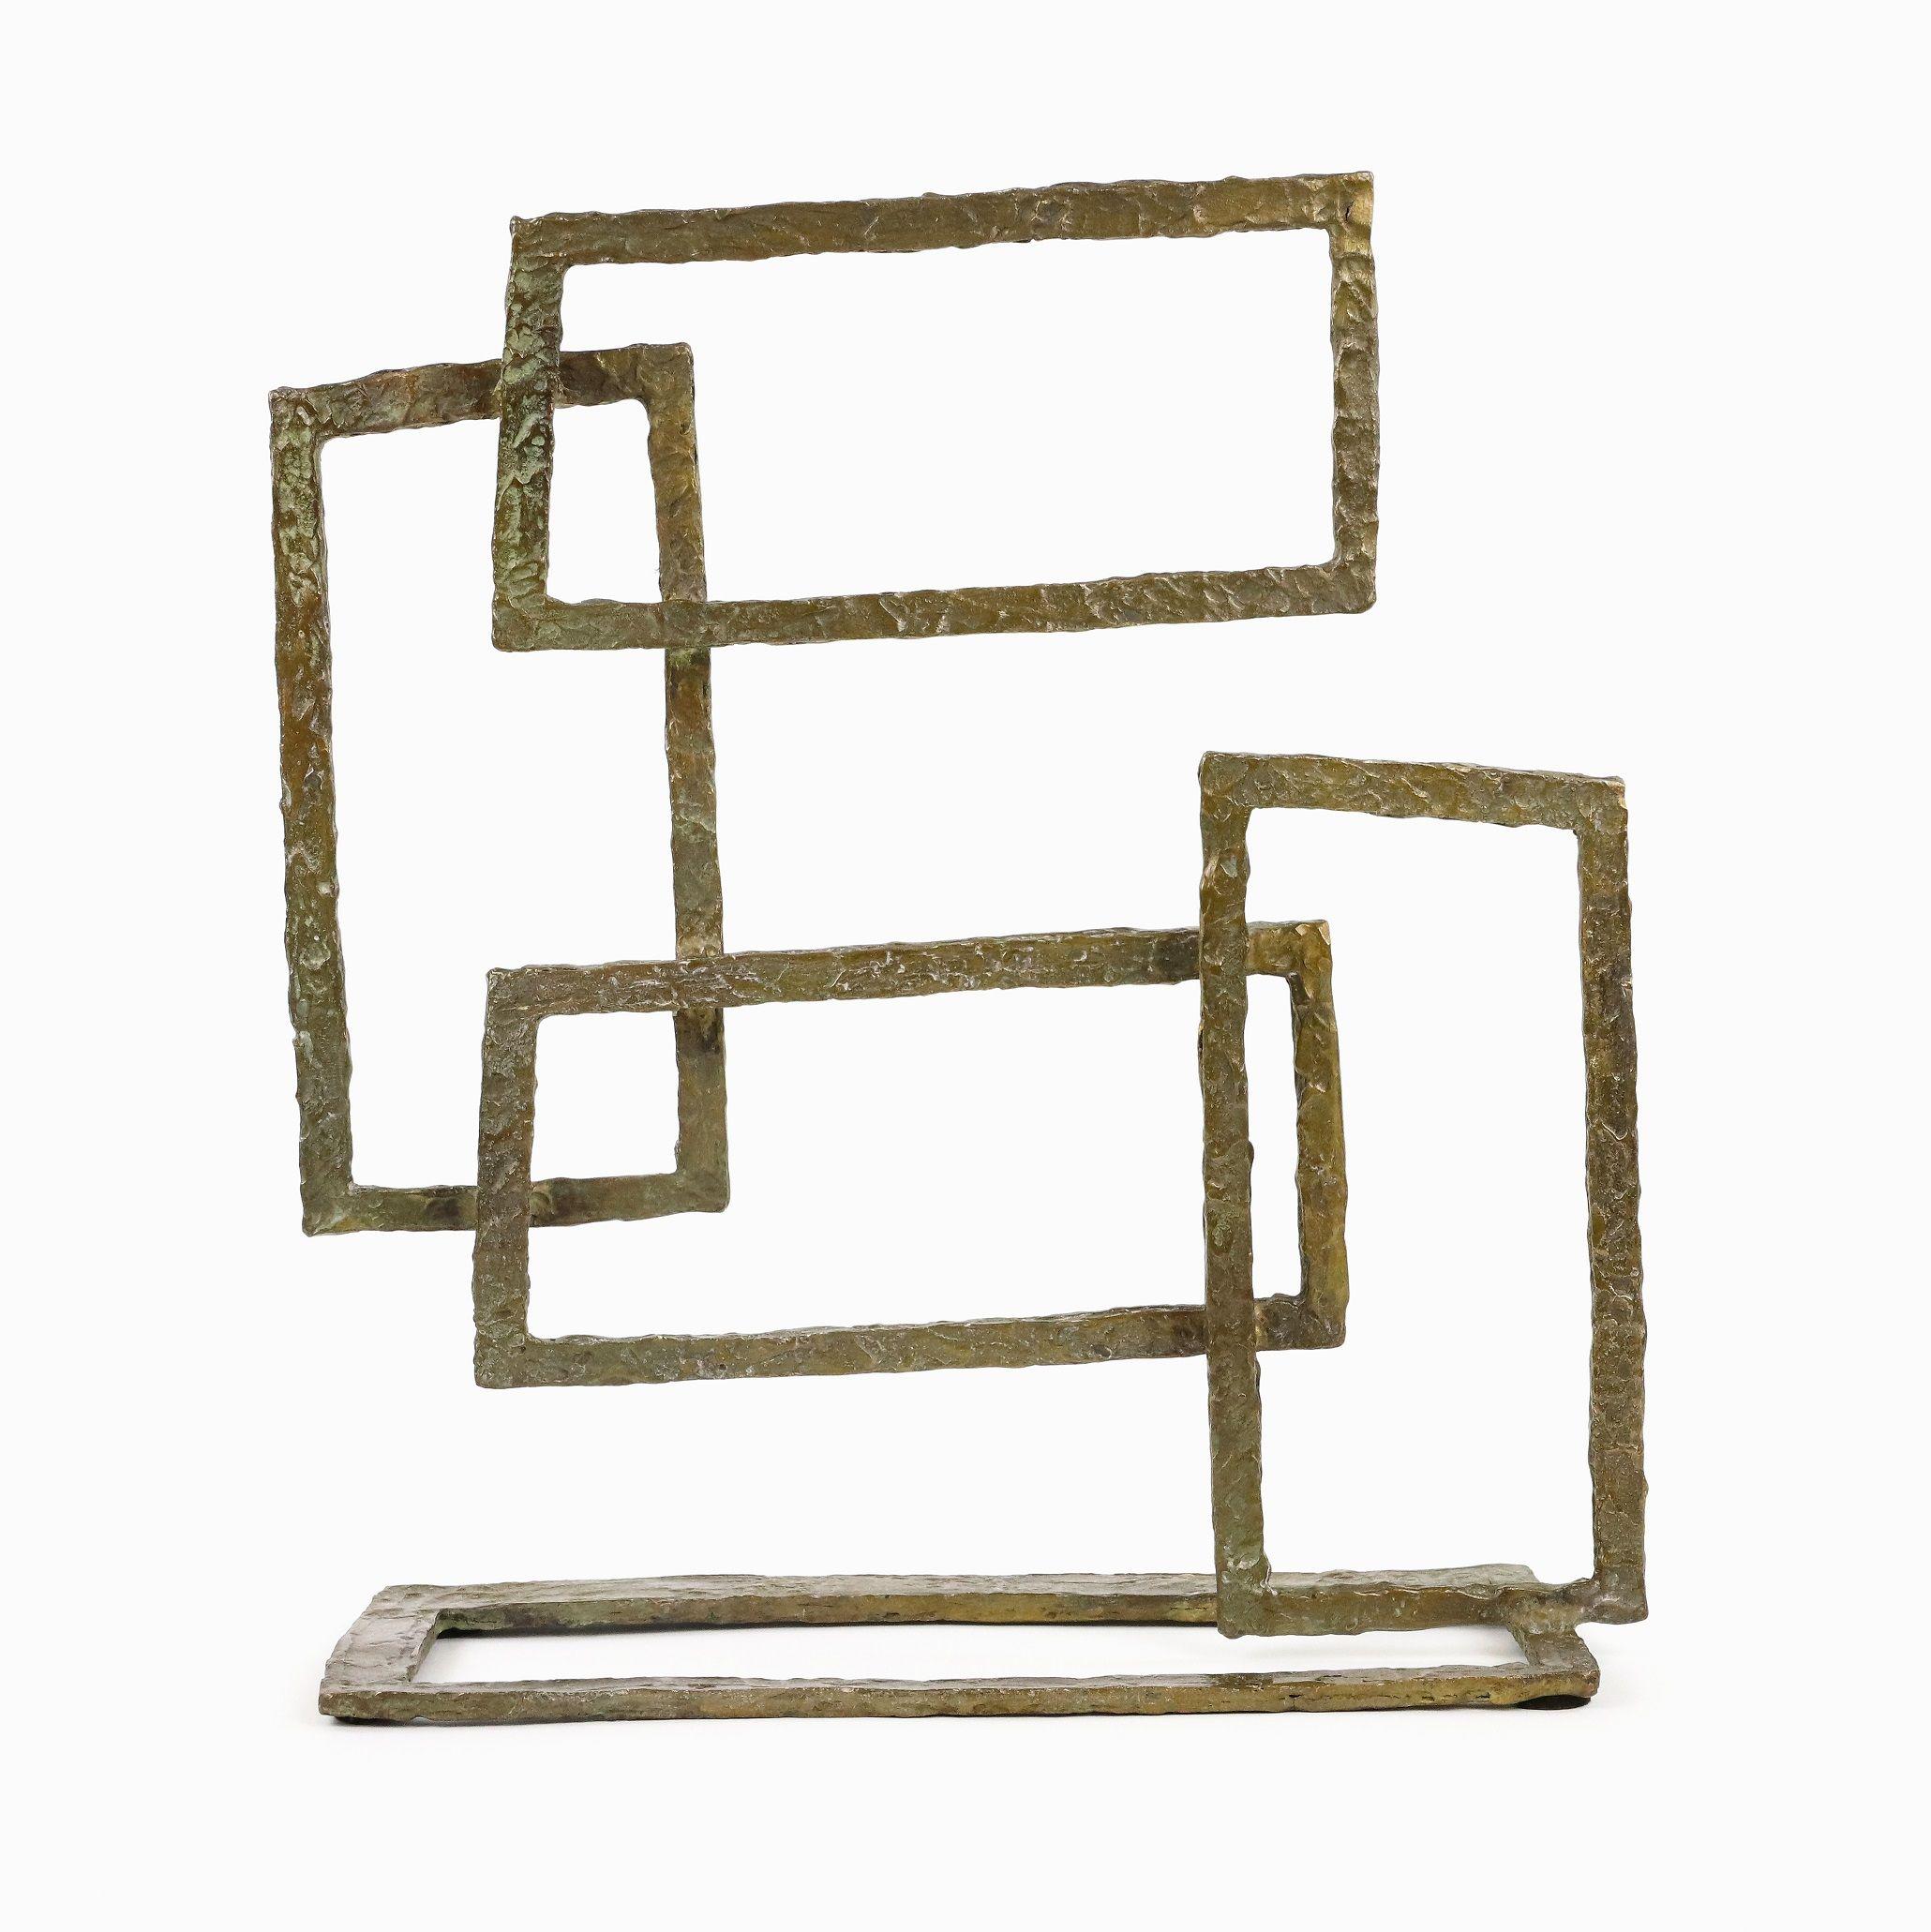 Composition V by Delphine Brabant - Abstract geometric bronze sculpture For Sale 3